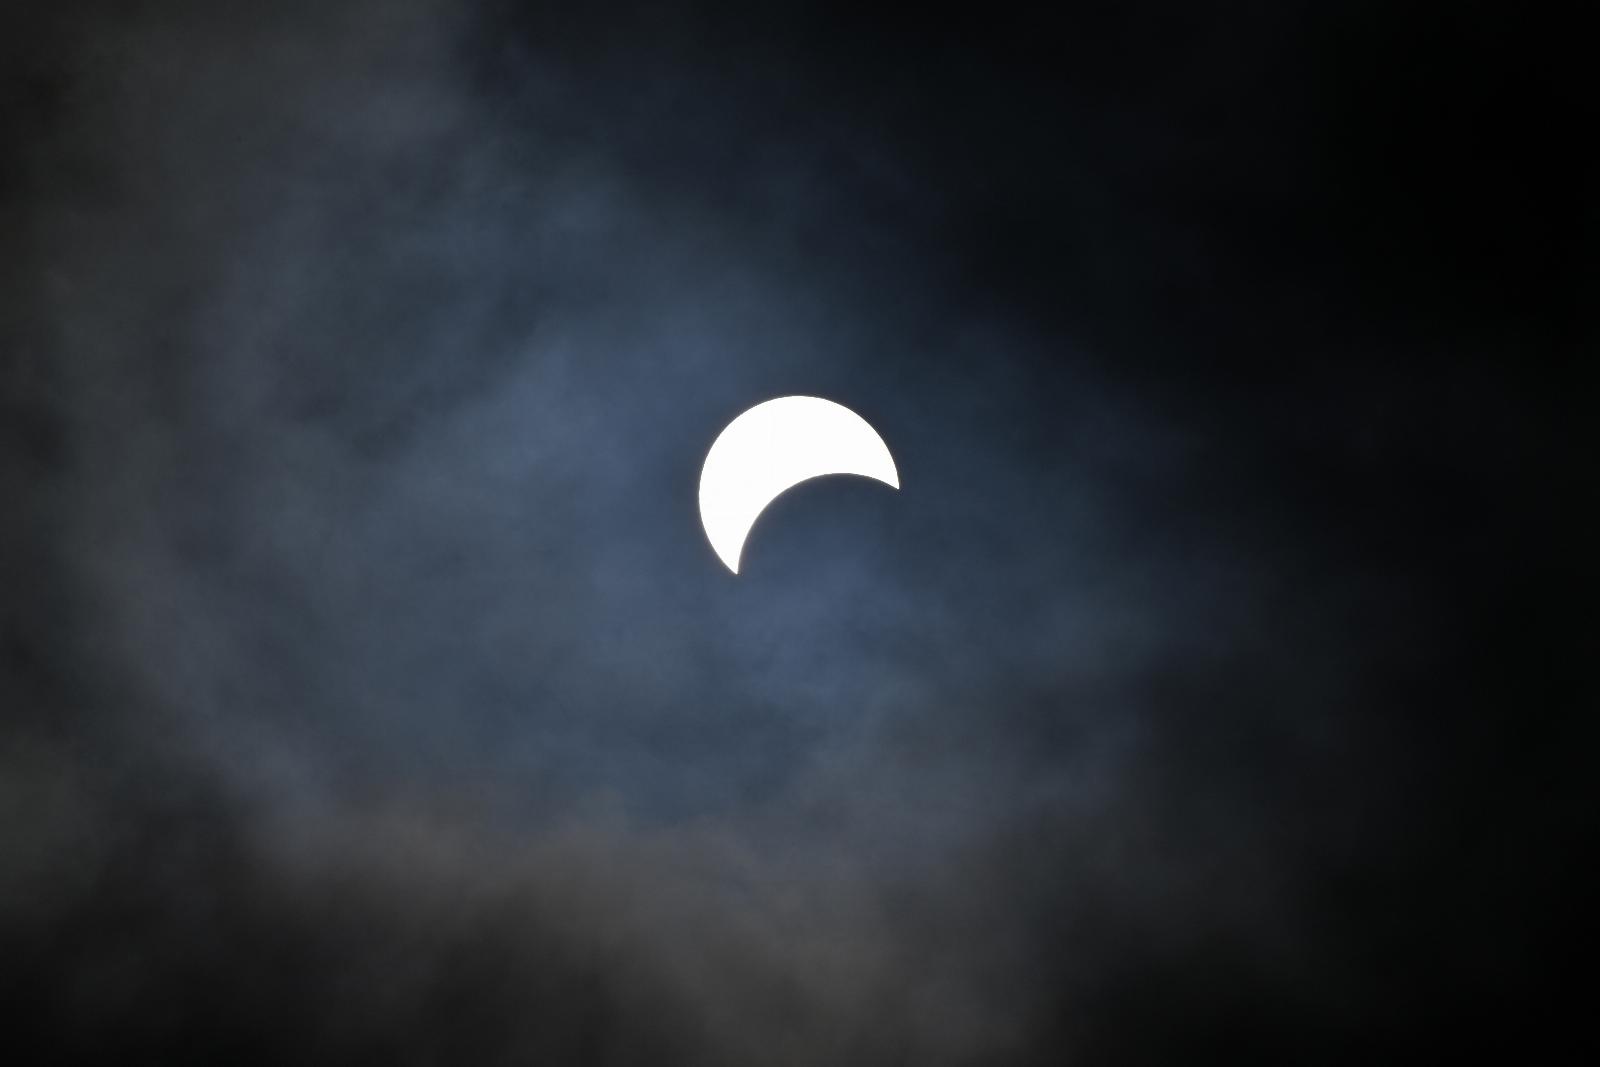 Now at the top of the App Store, The Eclipse App is a great companion for Monday’s solar eclipse